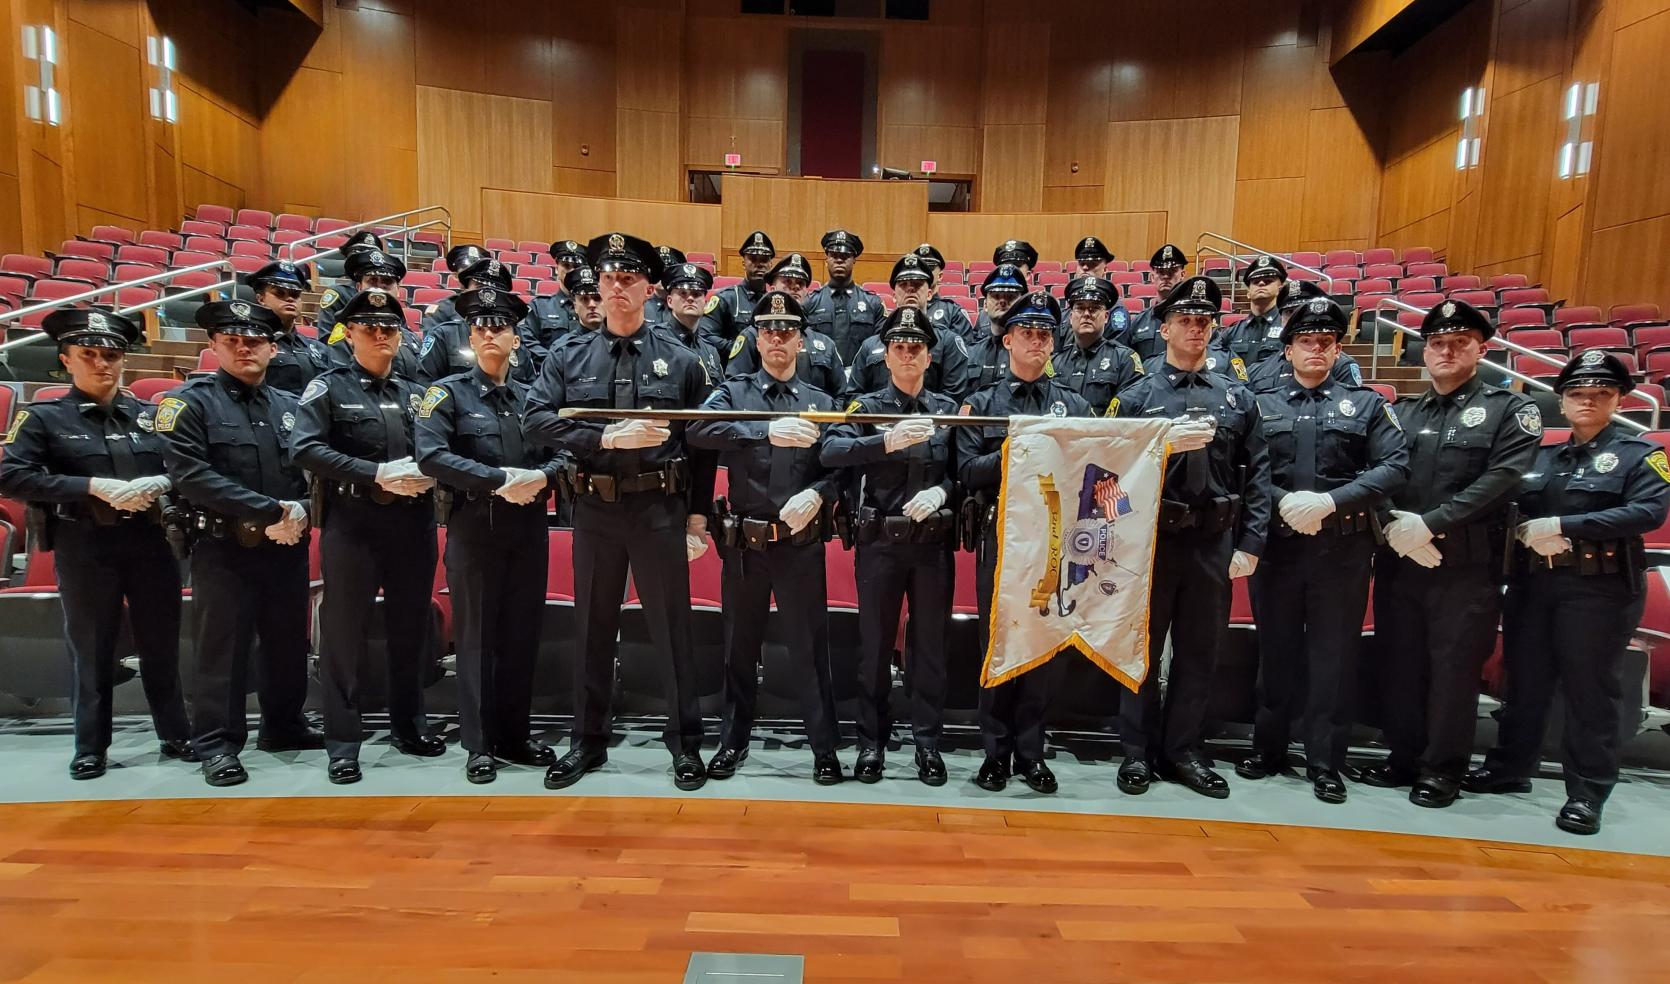 34 Police Officers stand together for a photo for graduation from the MPTC Police Academy